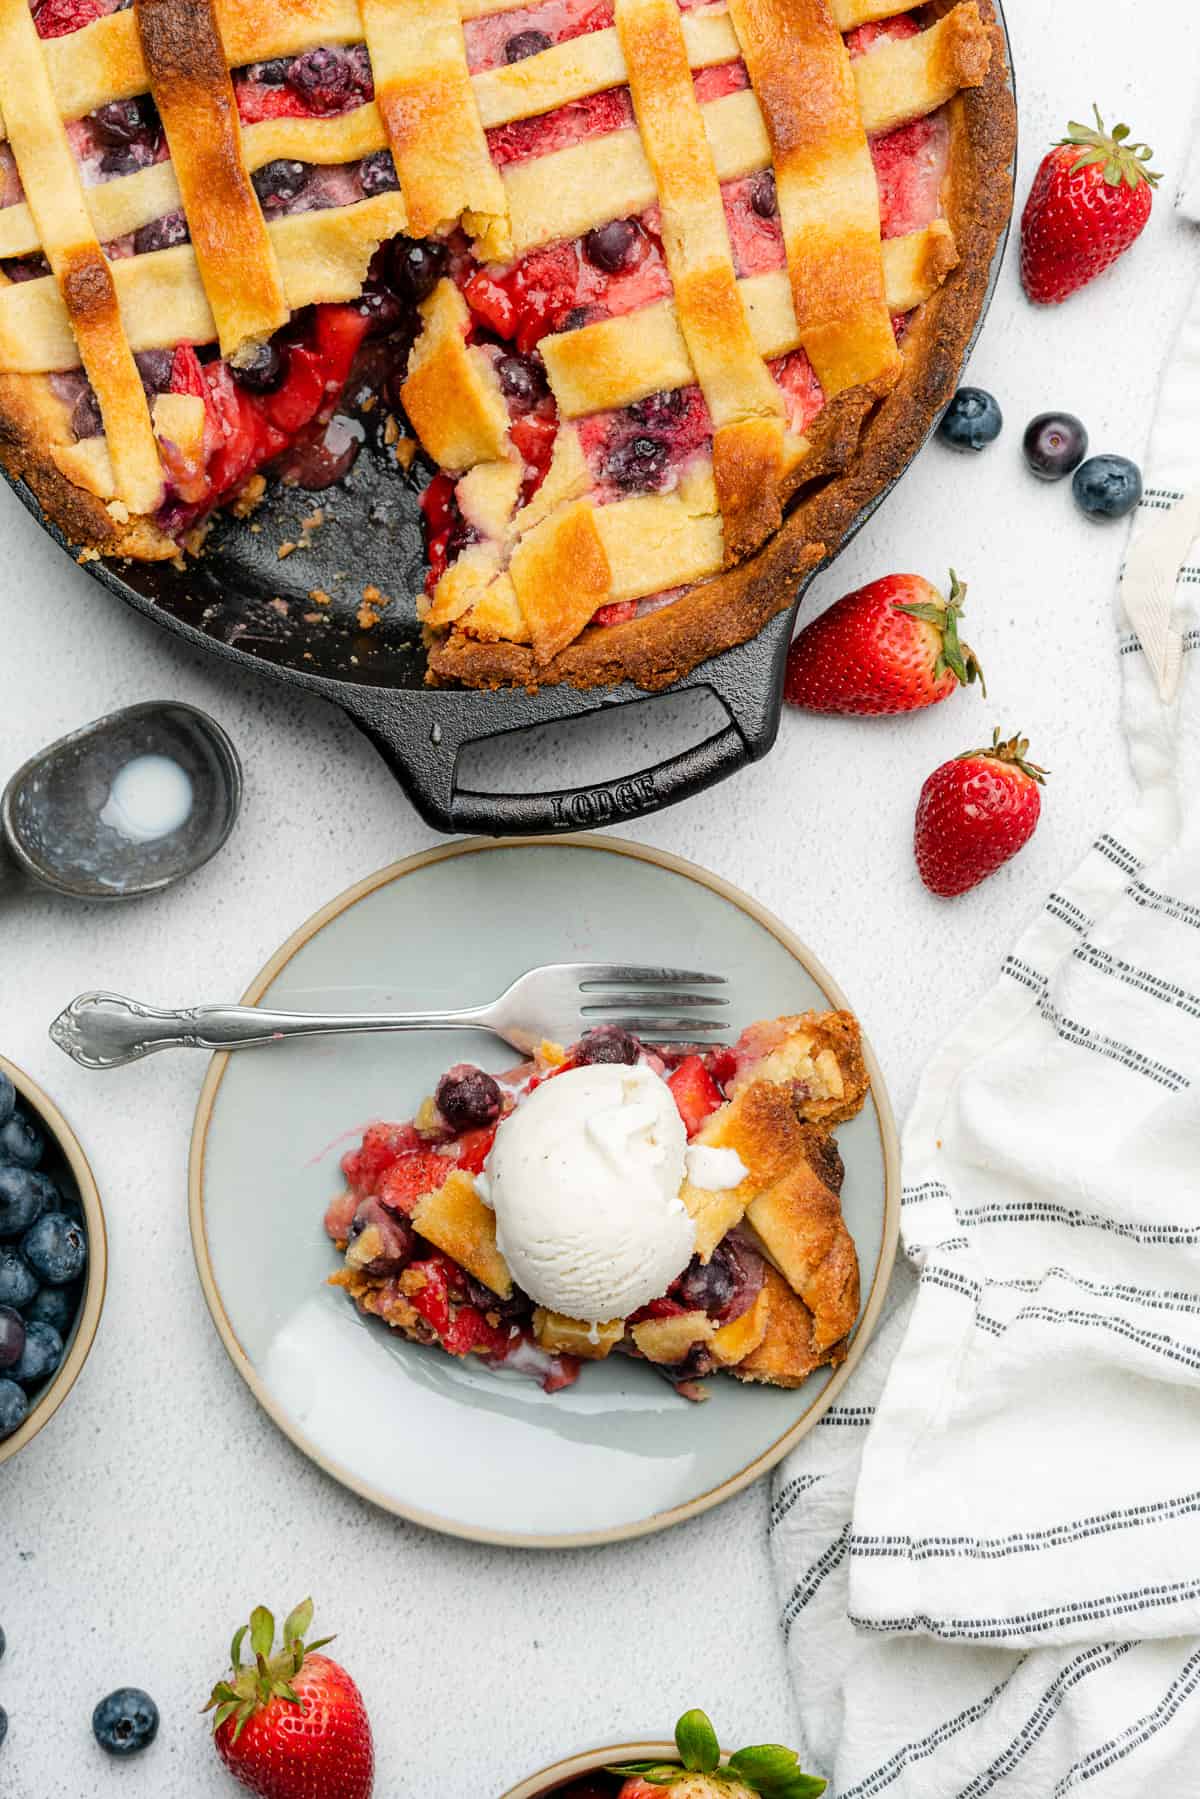 strawberry blueberry pie on a plate with low carb ice cream next to a cast iron skillet with the pie in it